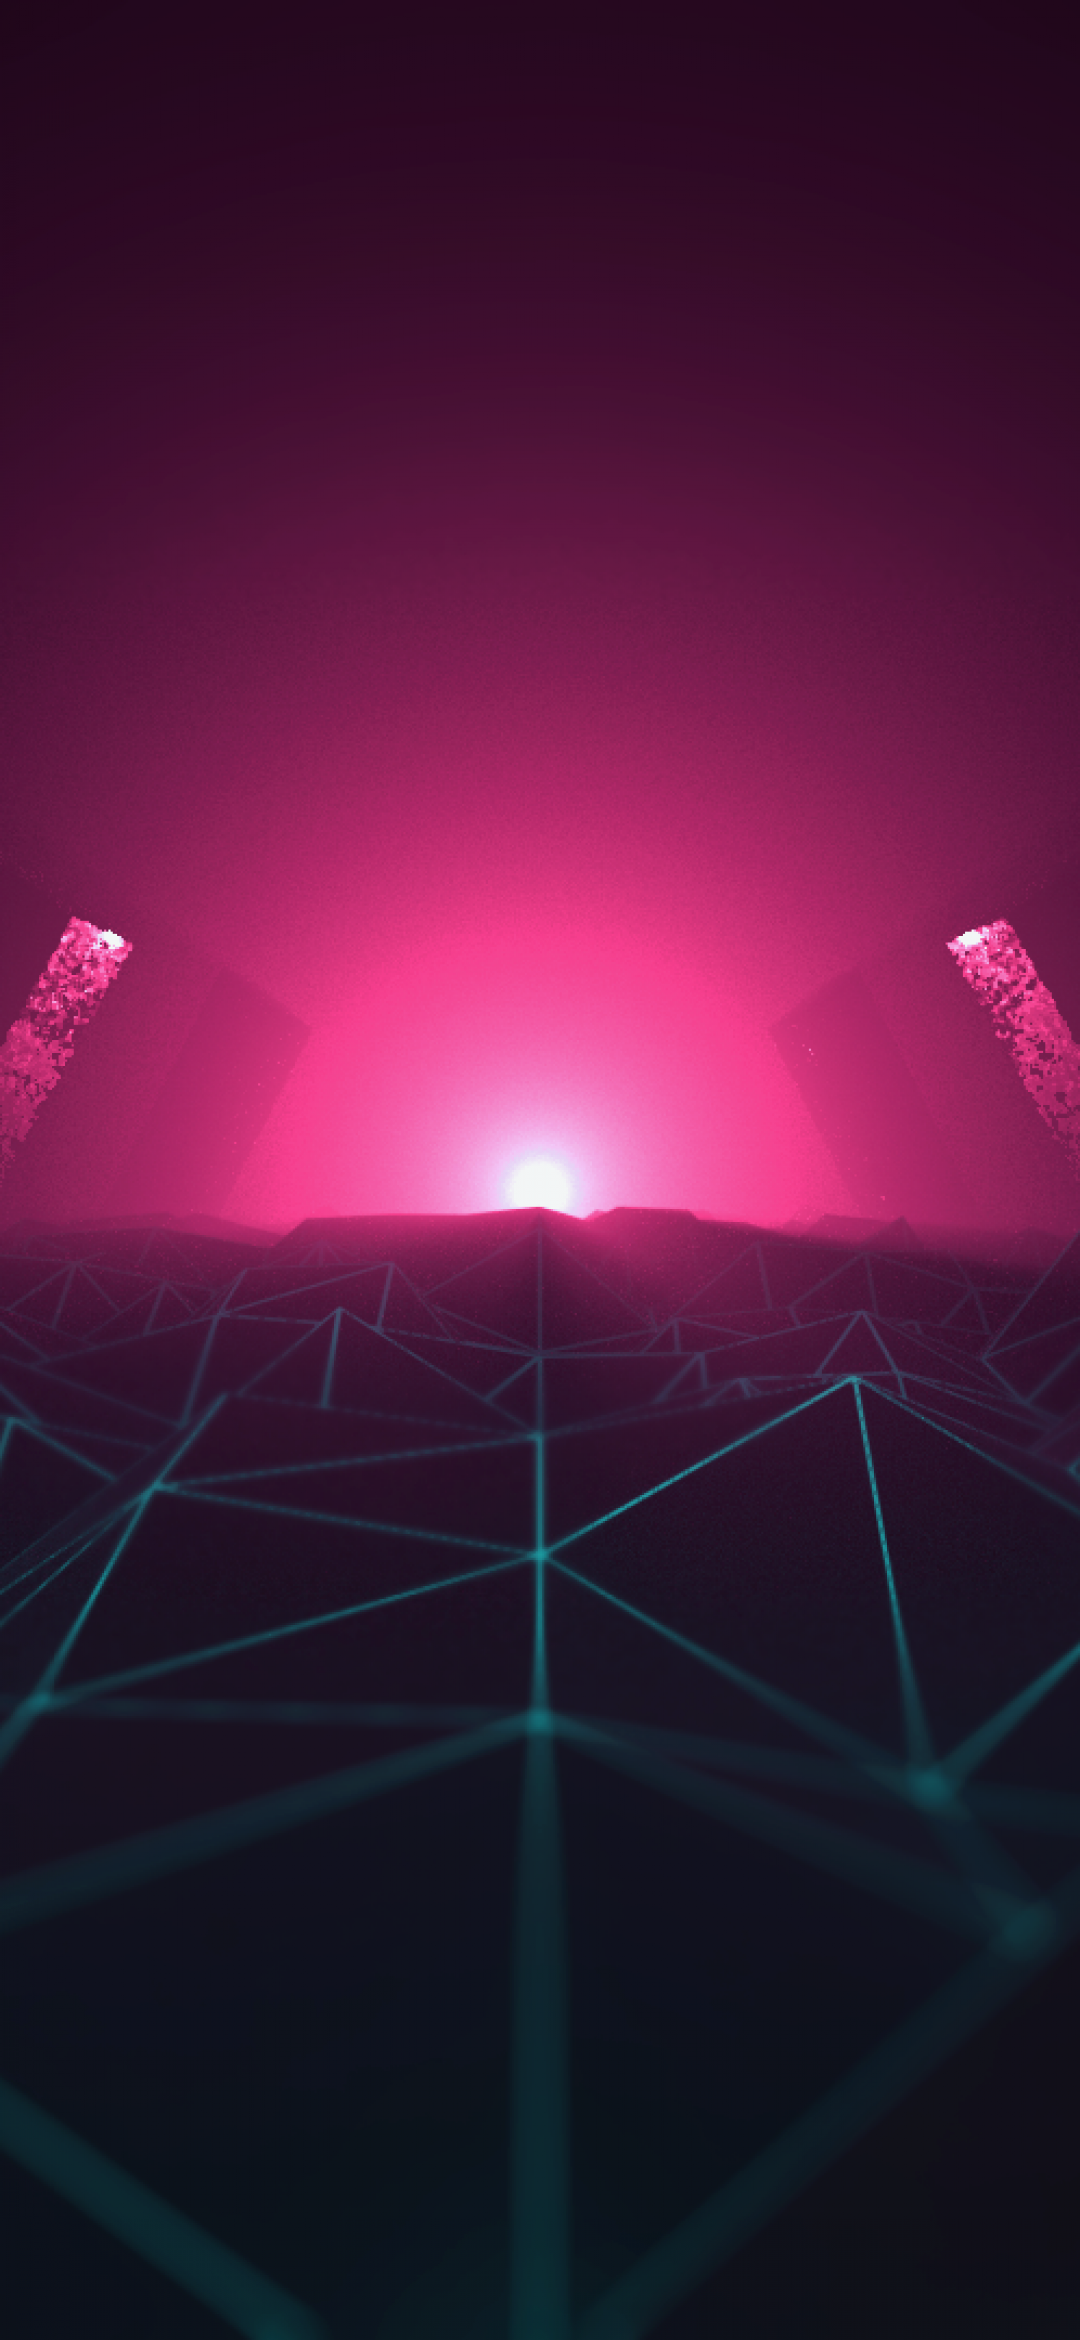 Download 1080x2340 Synthwave, Retro Wave, Neon Light, Path